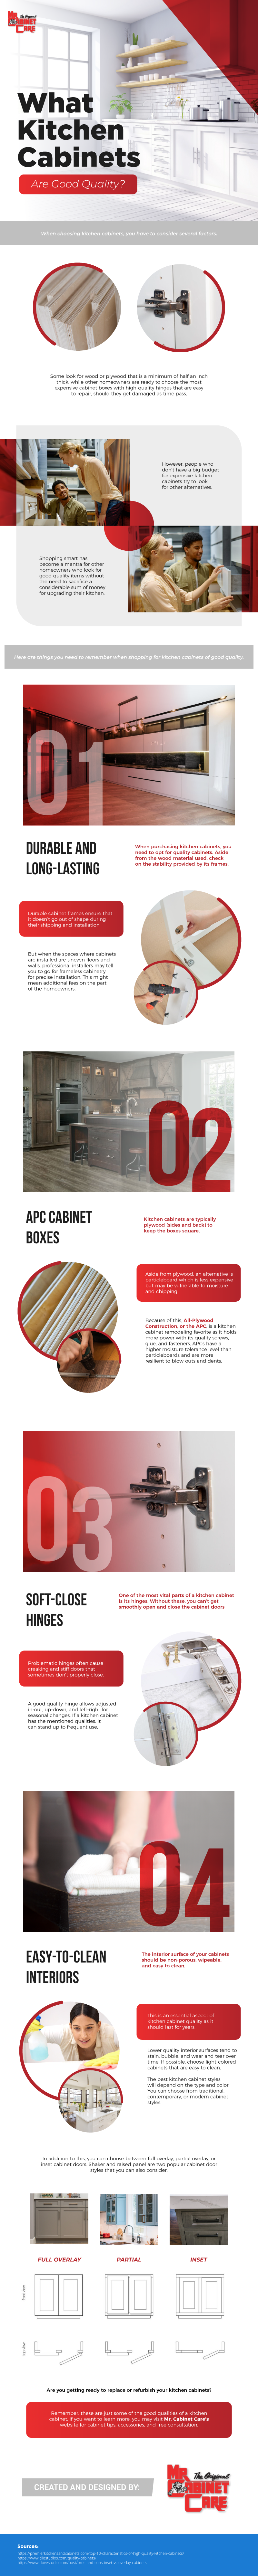 What_Kitchen_Cabinets_Are_Good_Quality_infographic_image